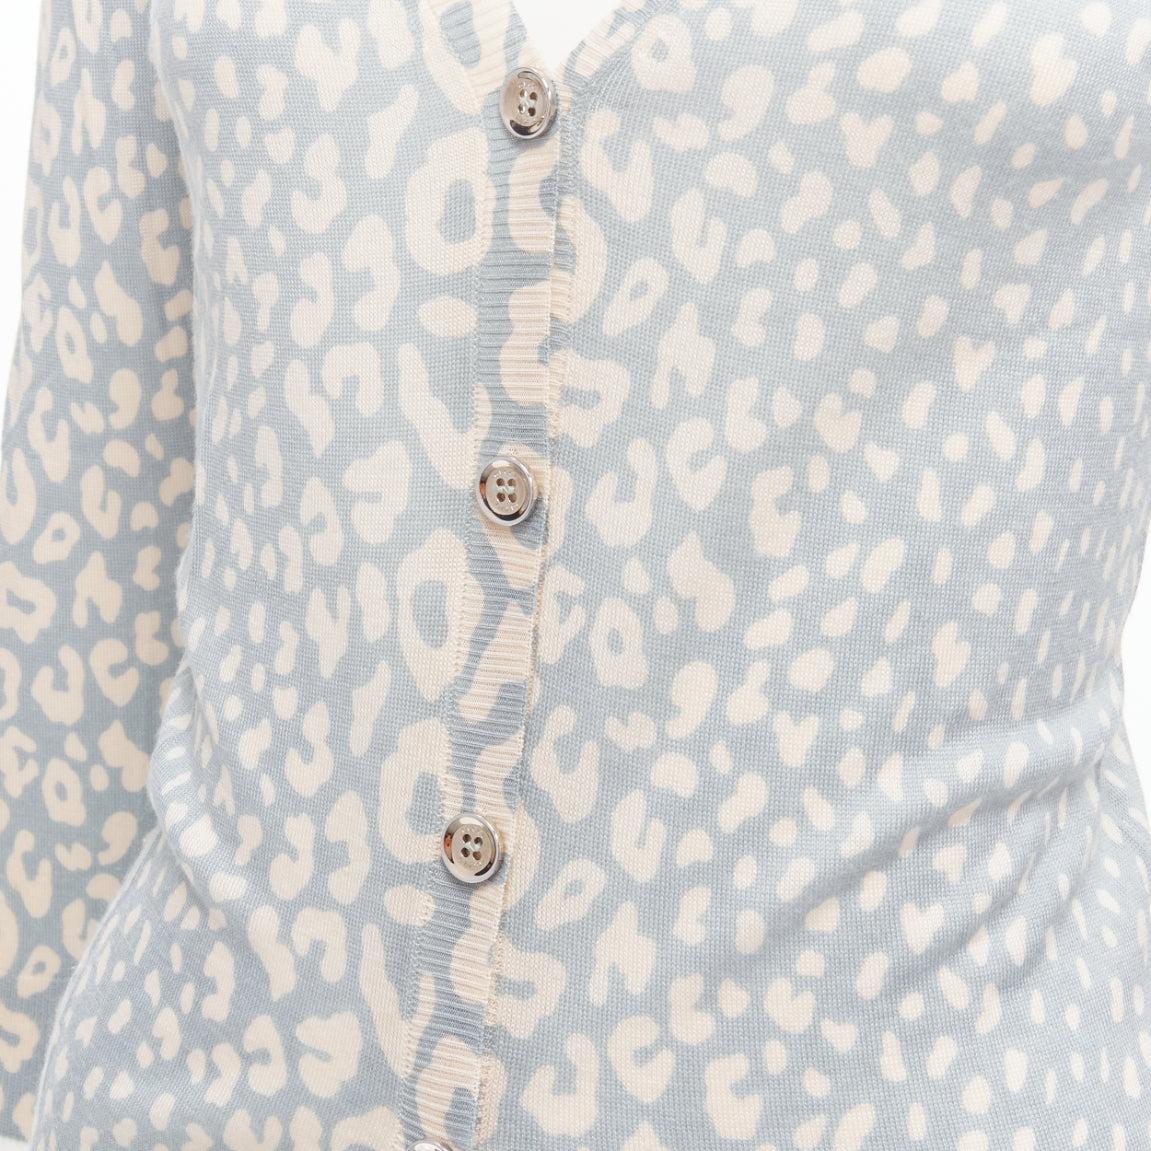 GUCCI Vintage green blue leopard print cashmere silk wool V-neck cardigan IT38 XS
Reference: SNKO/A00245
Brand: Gucci
Material: Cashmere, Silk, Blend
Color: Blue, White
Pattern: Leopard
Closure: Button
Made in: Italy

CONDITION:
Condition: Good,